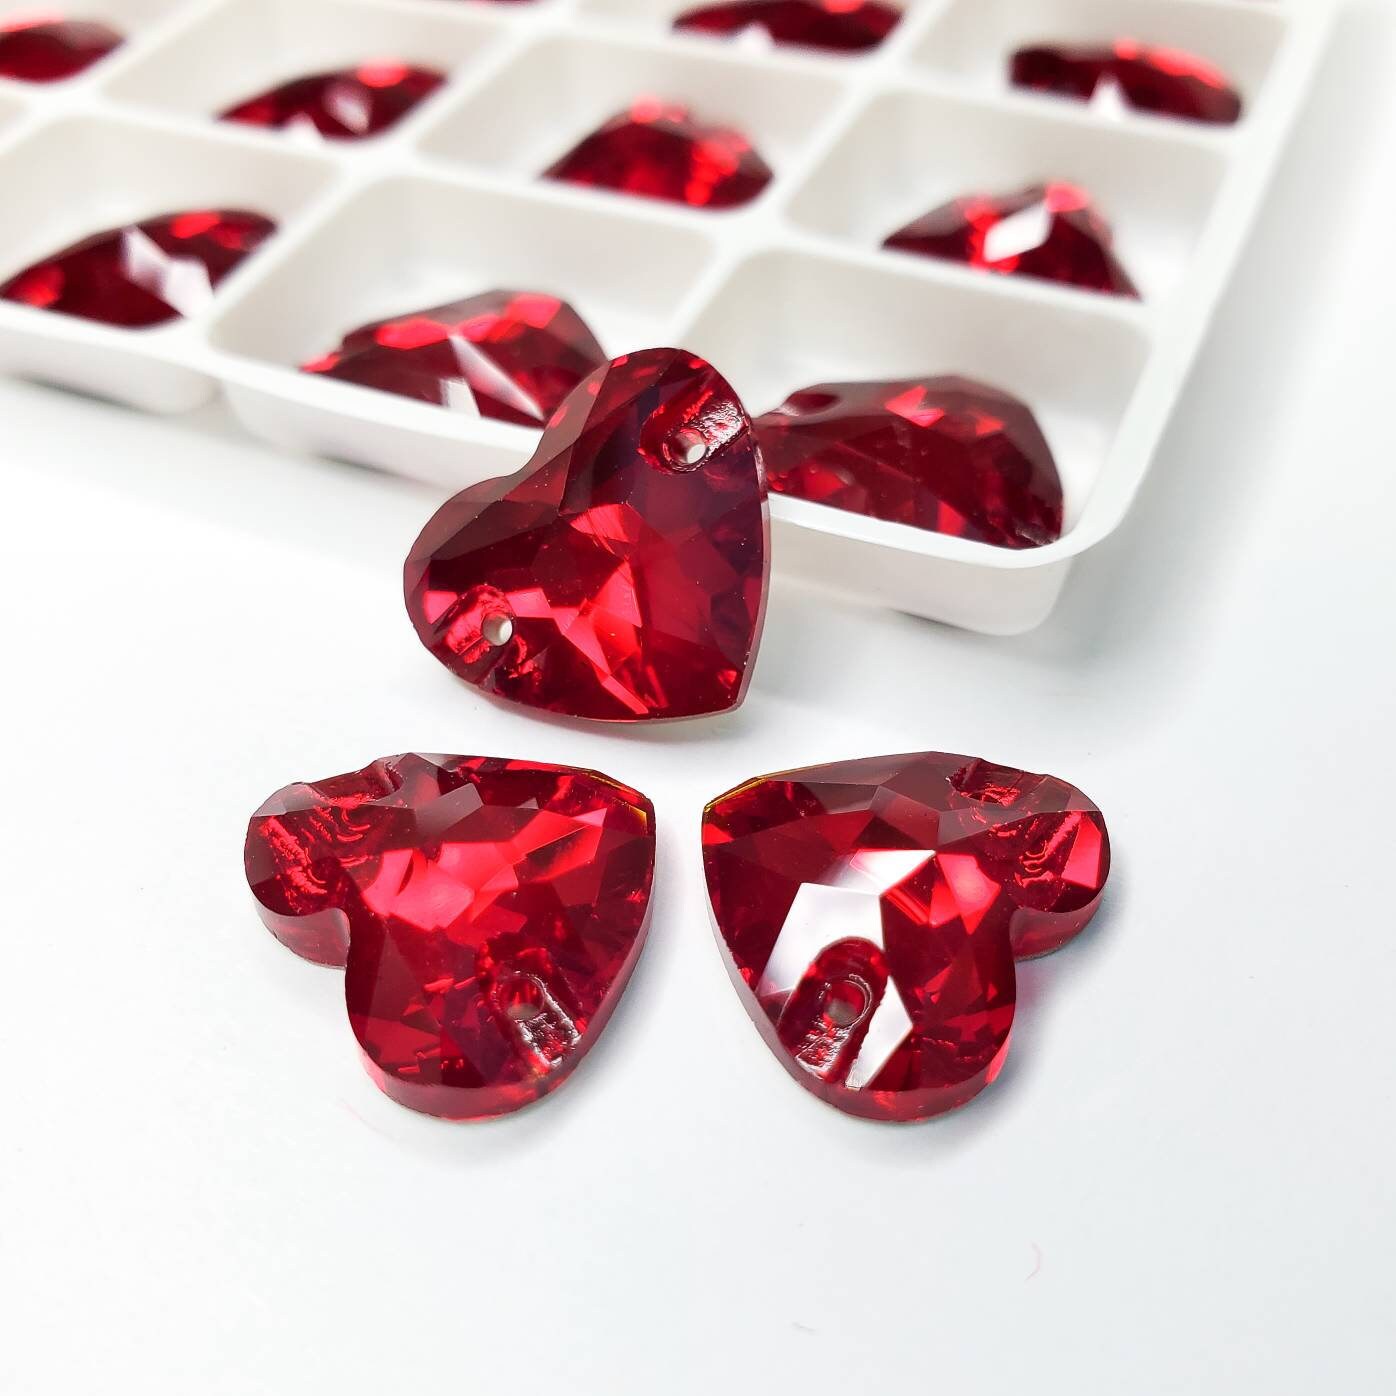 HGYCPP Heart Crystal Gems Flat Back Heart Rhinestones for DIY  Crafts,Clothes,Shoe Decor